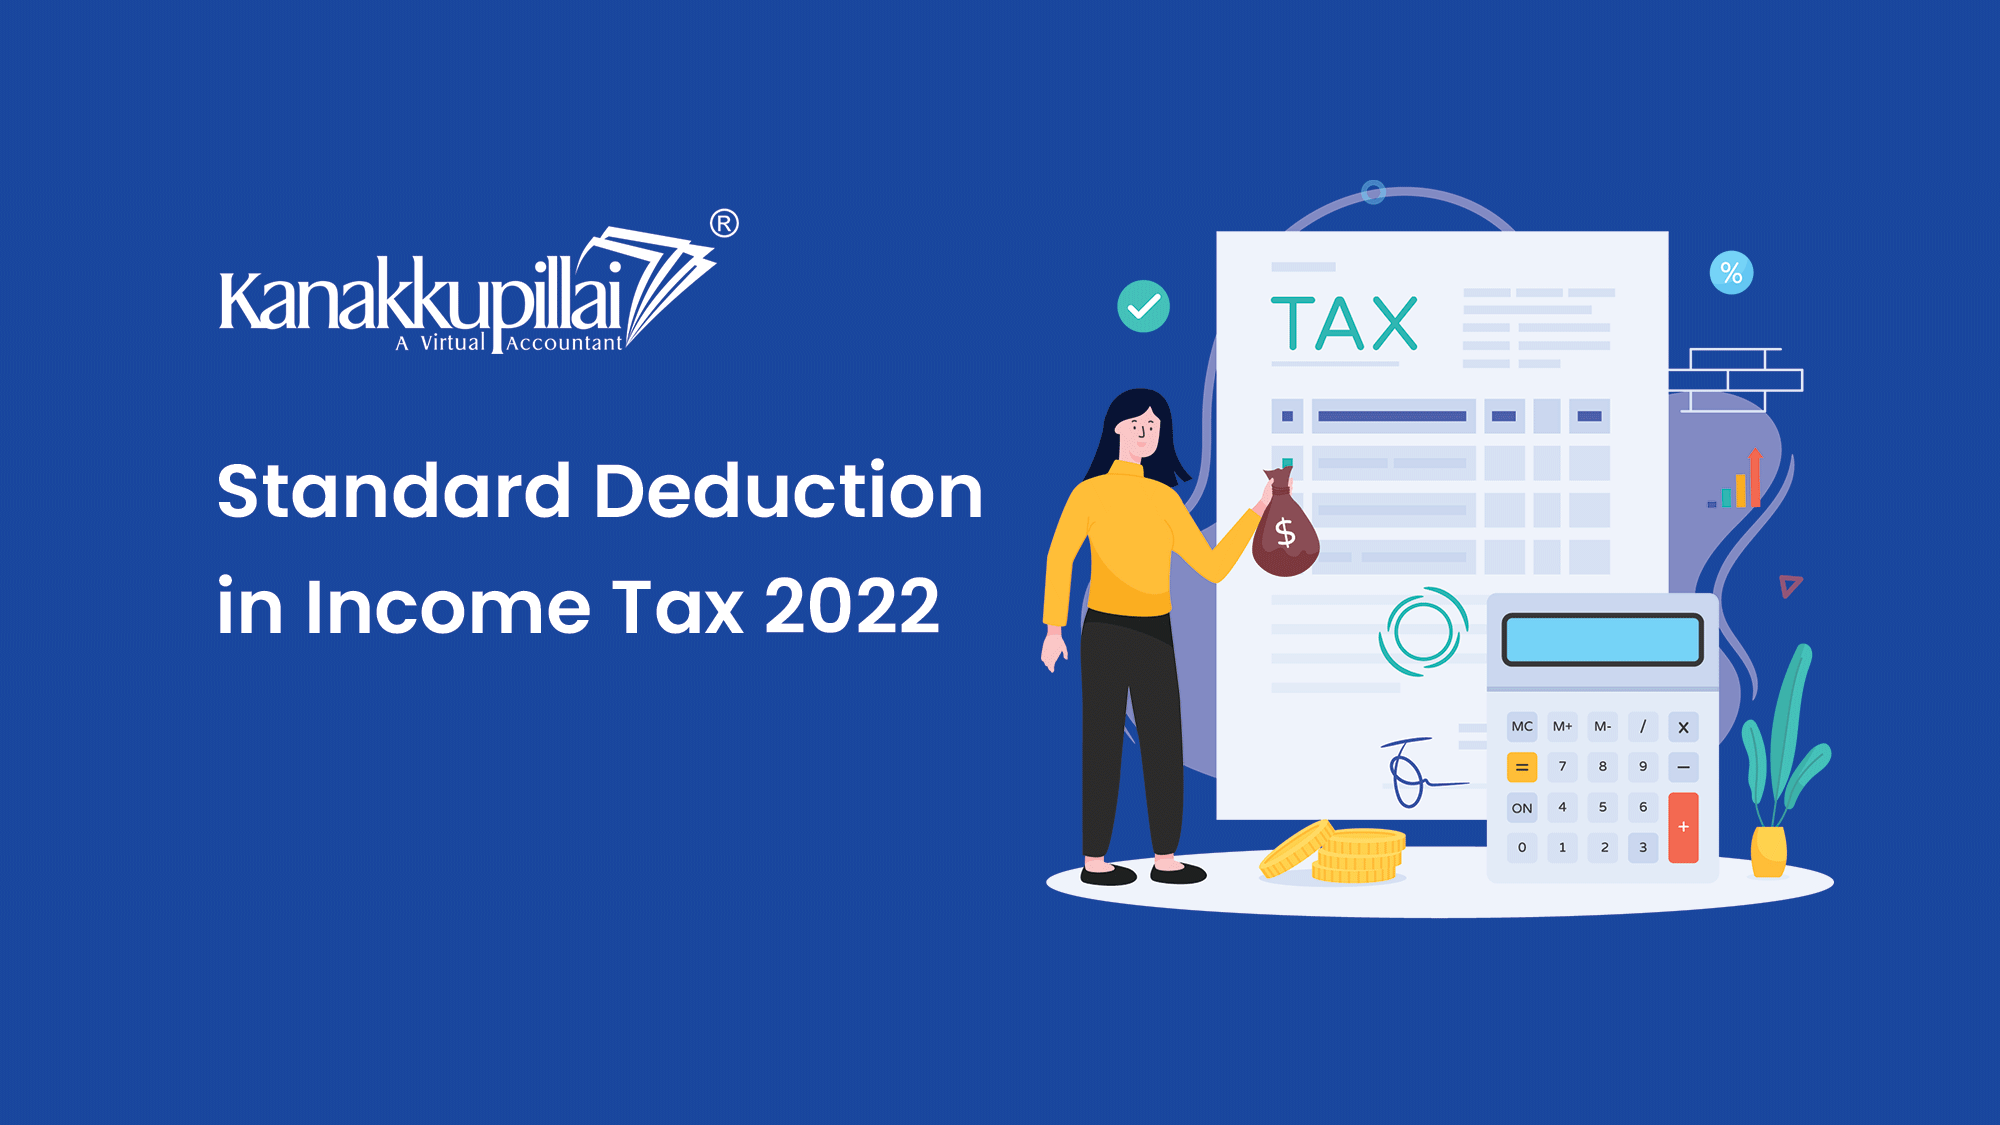 Standard Deduction in Income tax 2022